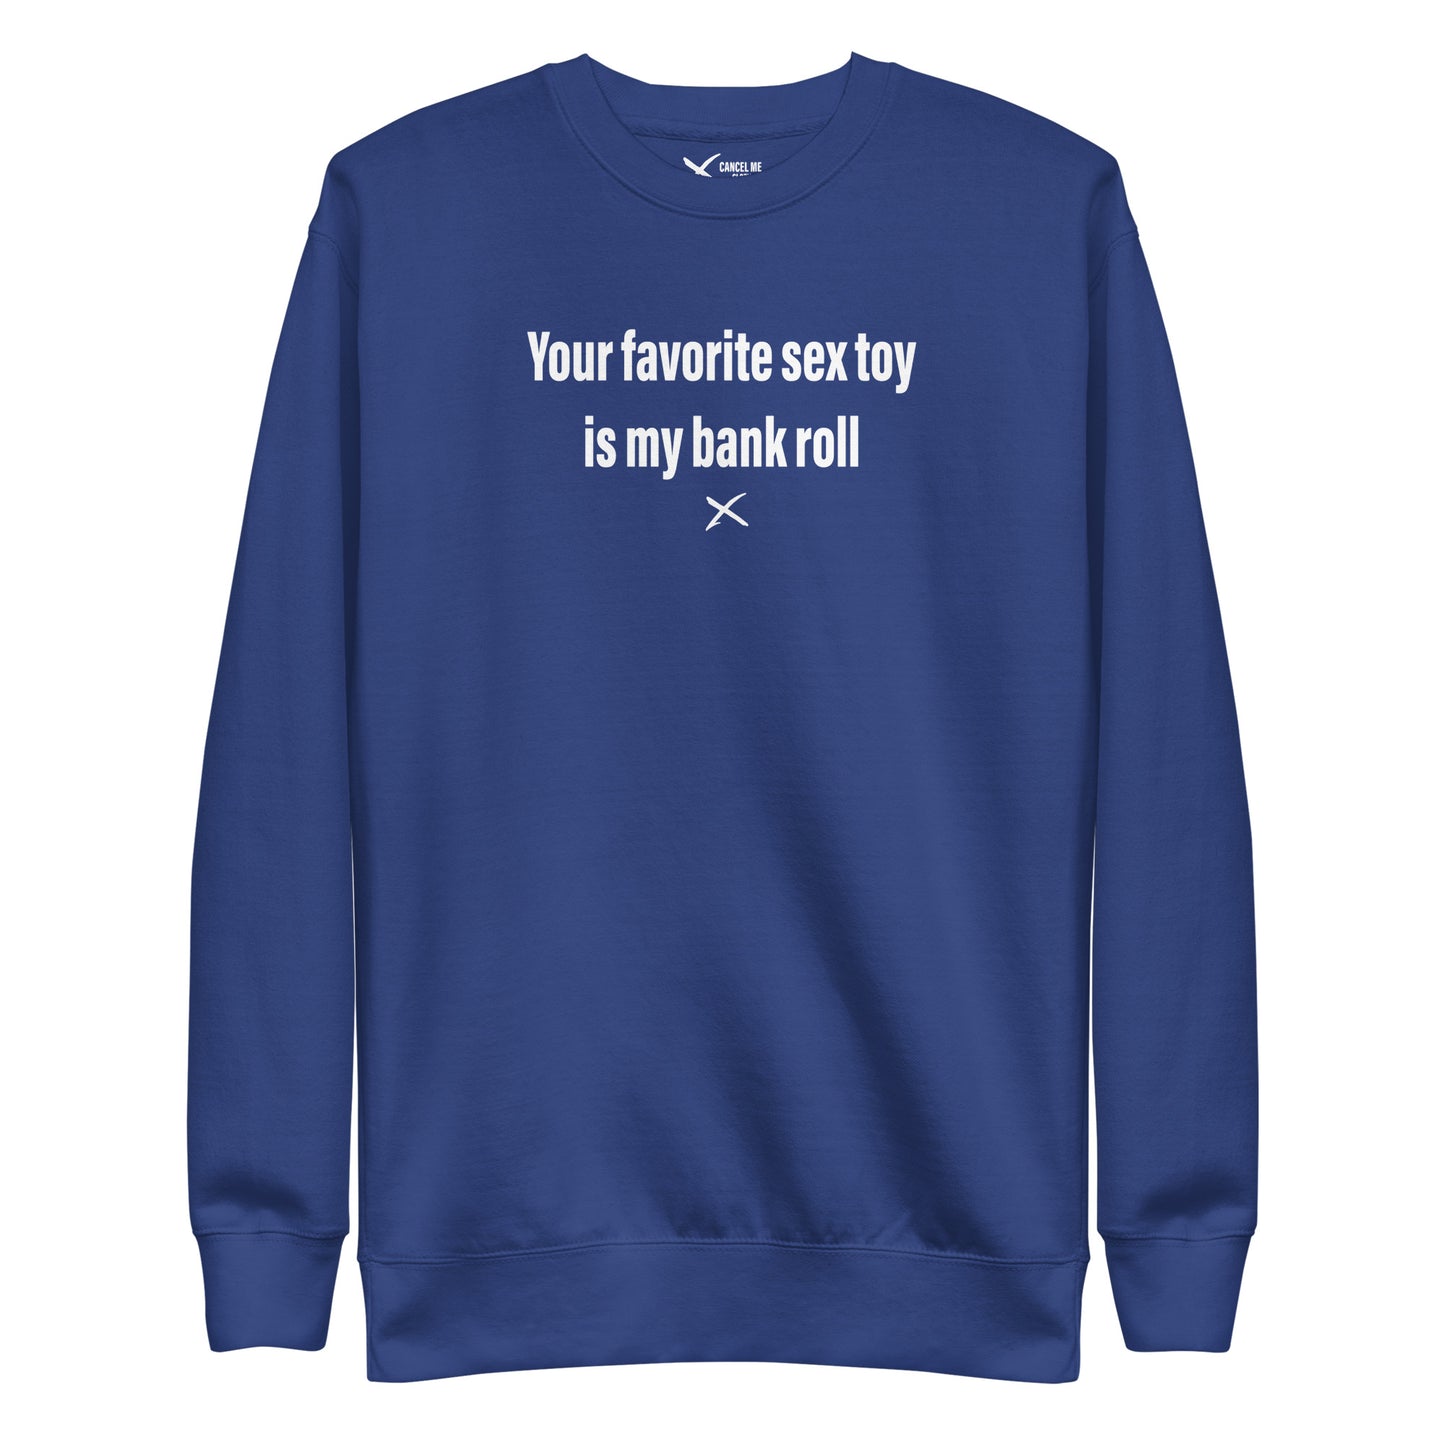 Your favorite sex toy is my bank roll - Sweatshirt